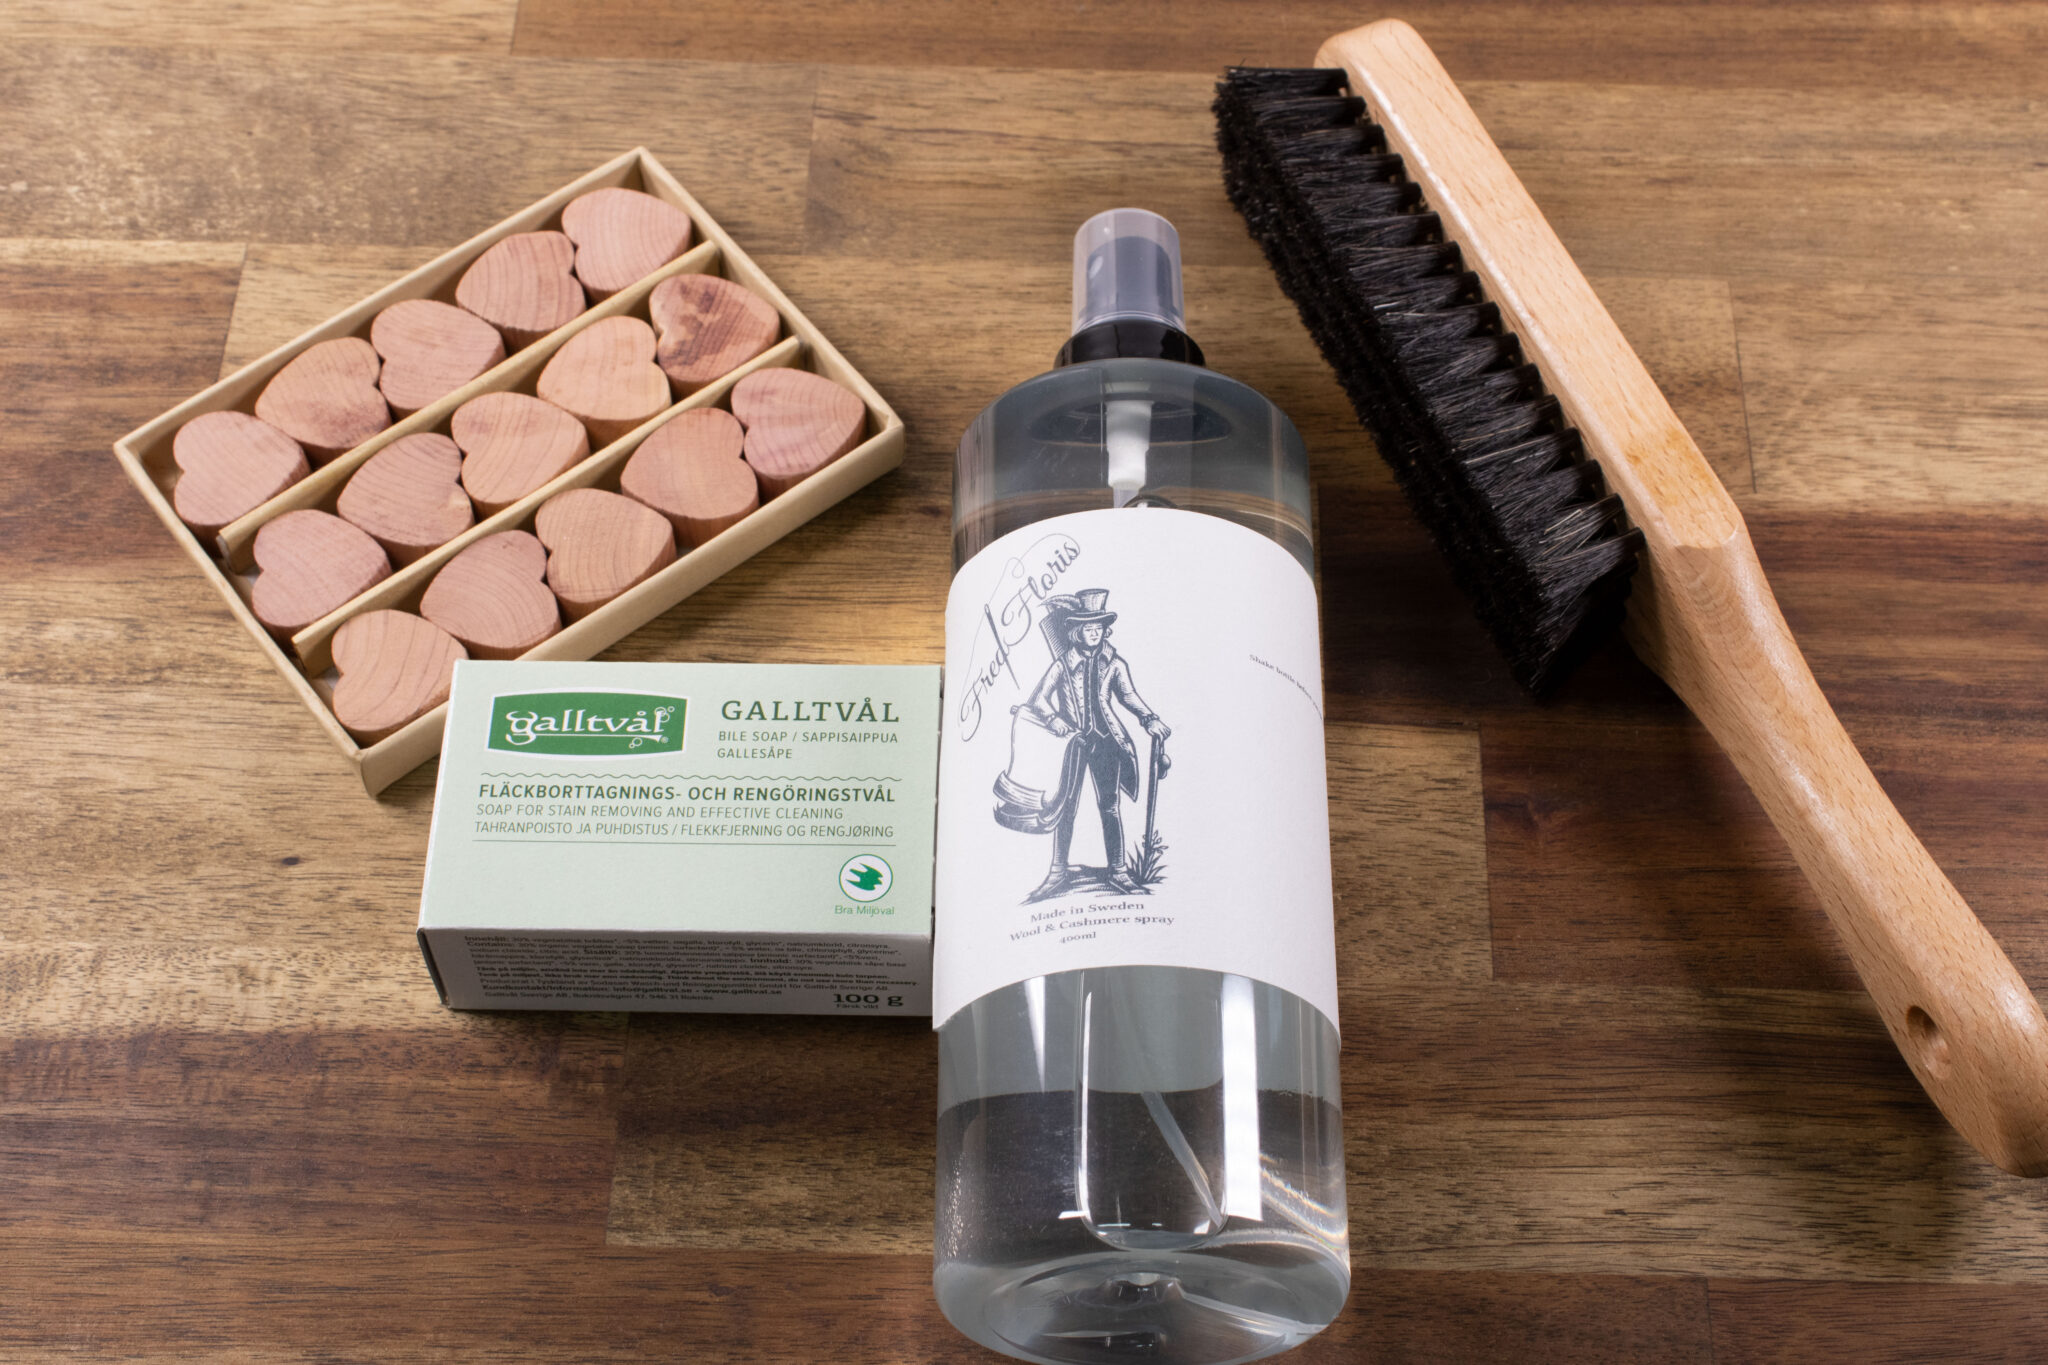 Product image of FredFloris horse hair clothes brush, all natural, organic Bile Soap, Cashmere / Wool spray